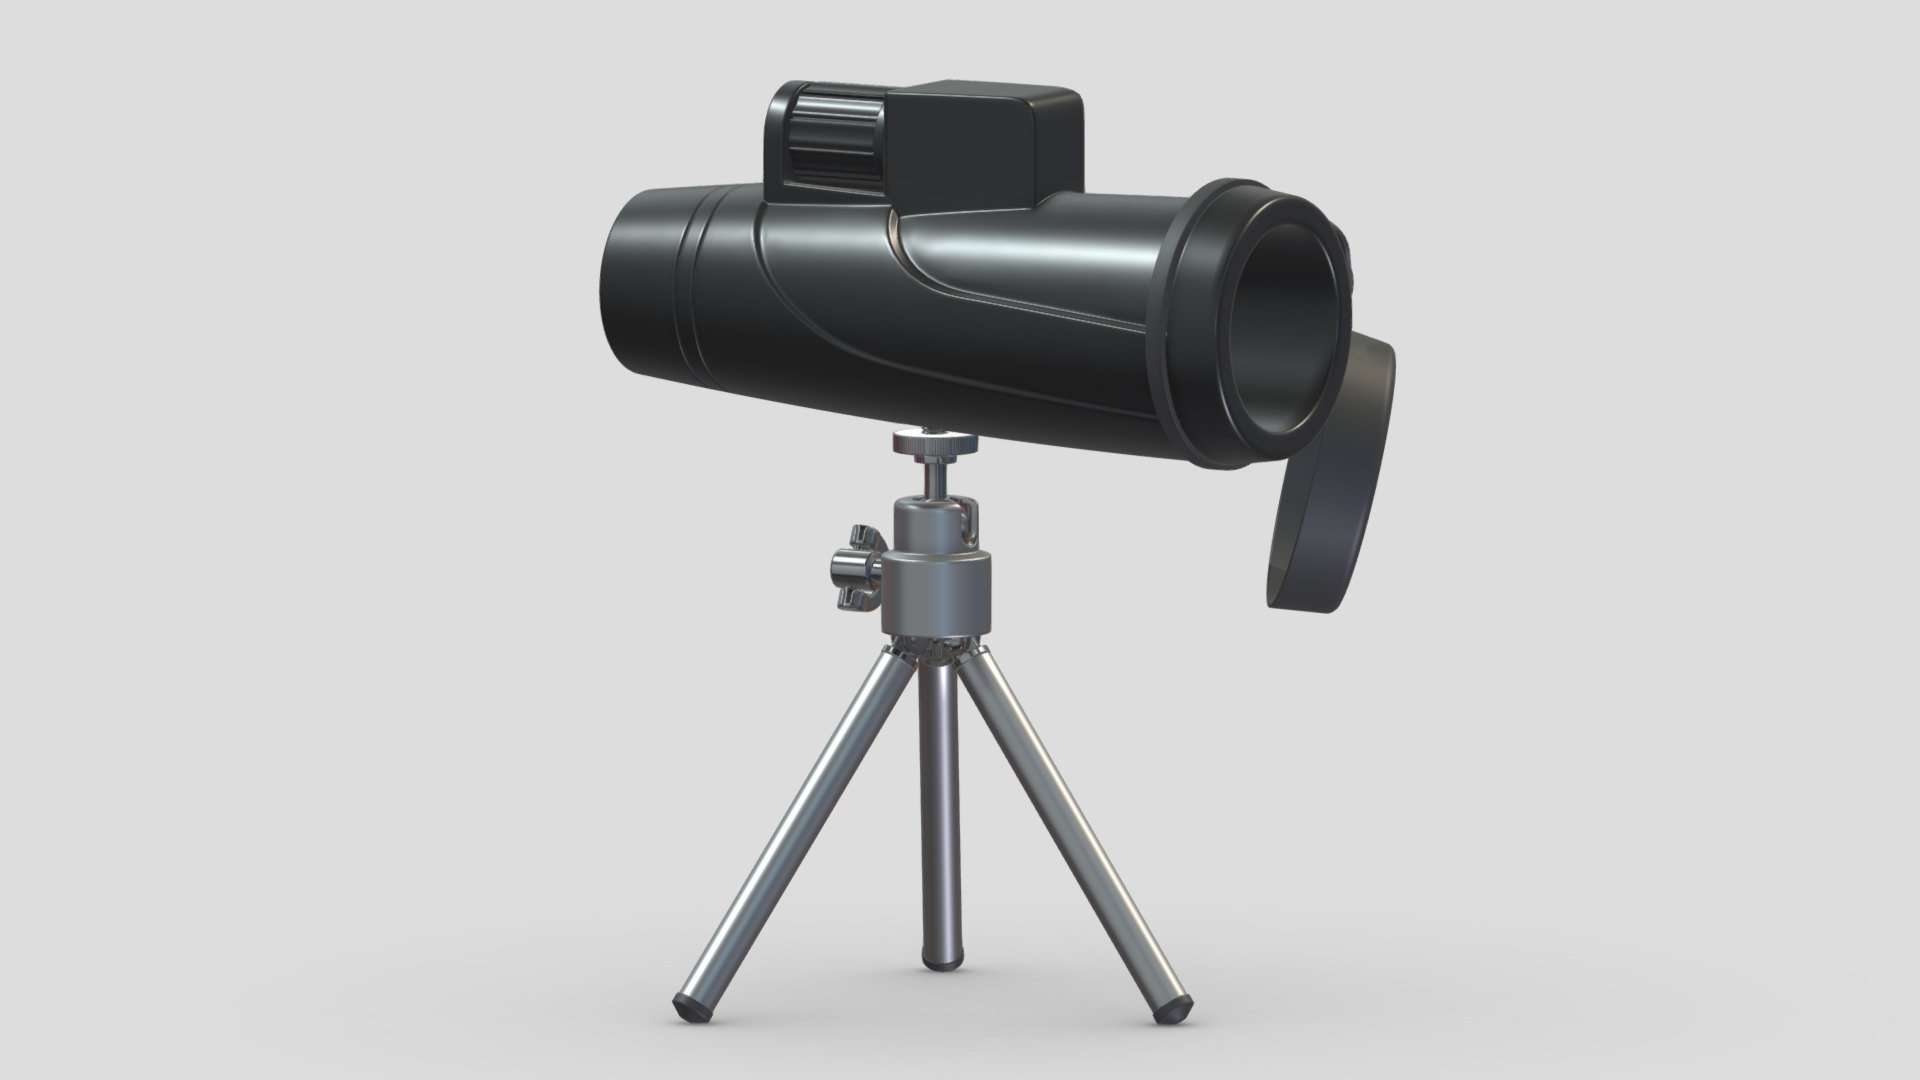 Hi, I'm Frezzy. I am leader of Cgivn studio. We are a team of talented artists working together since 2013.
If you want hire me to do 3d model please touch me at:cgivn.studio Thanks you! - 10x52mm Monocular - 3D model by Frezzy3D 3d model